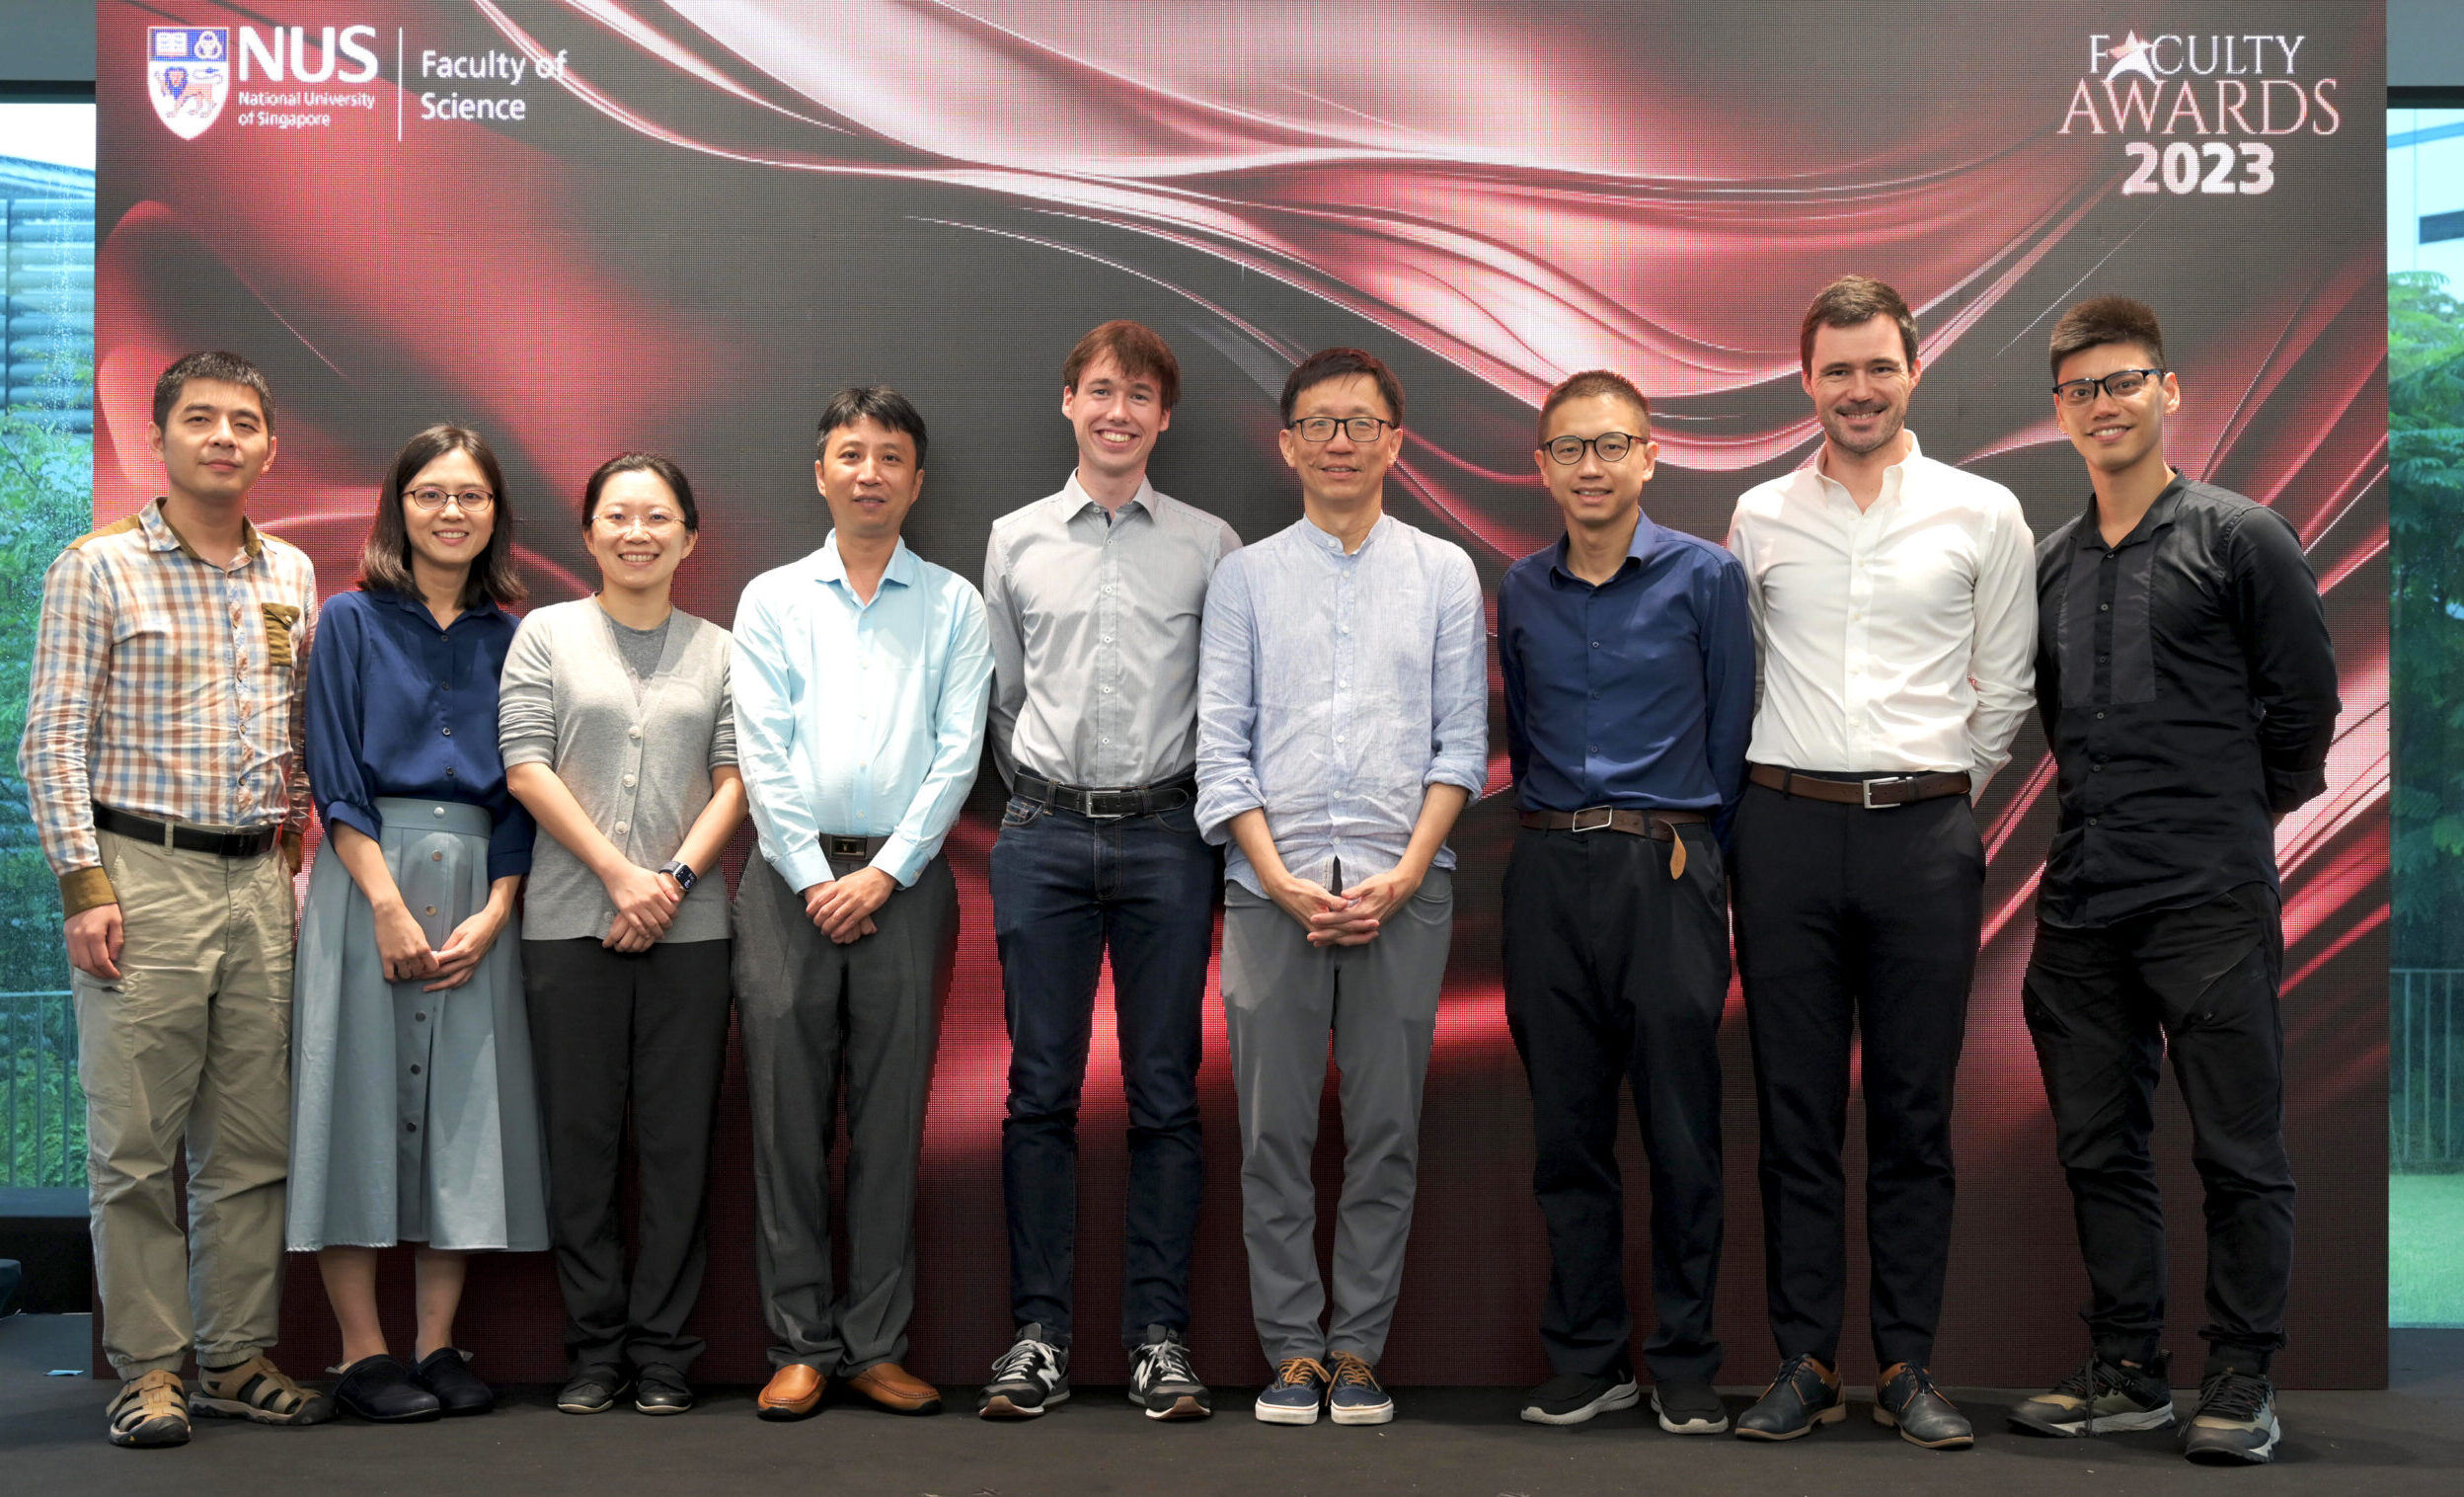 Congratulations to the Faculty Awards 2023 winners in the Department of Mathematics!